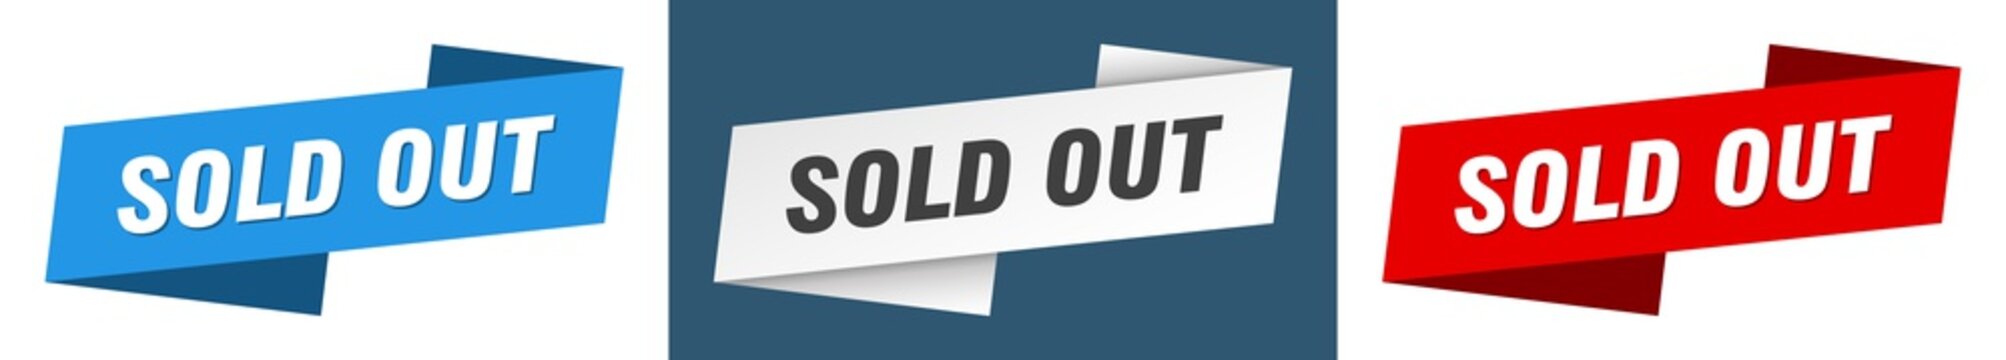 sold out banner. sold out ribbon label sign set